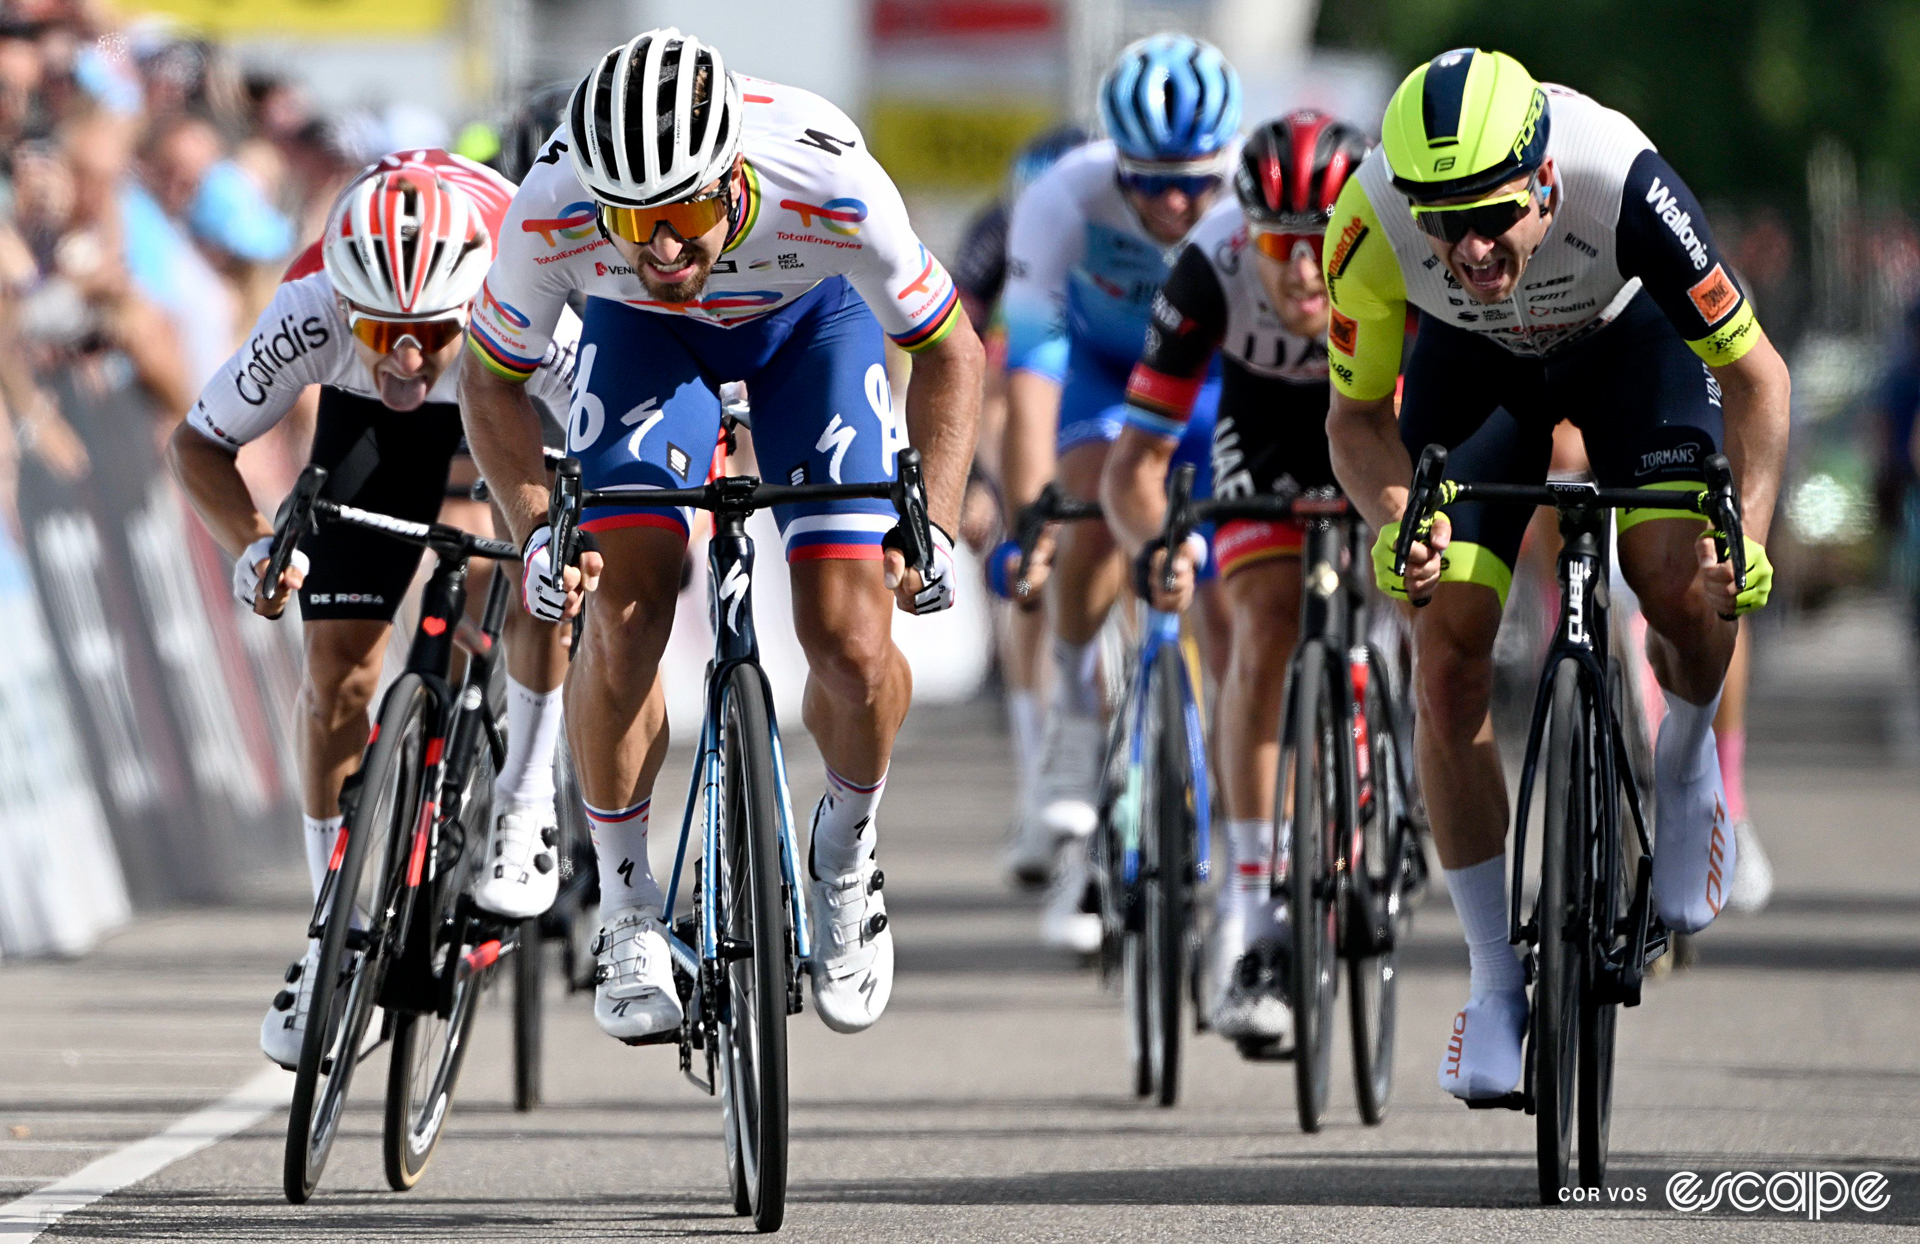 Peter Sagan on his way to winning a bunch sprint at the 2022 Tour de Suisse.